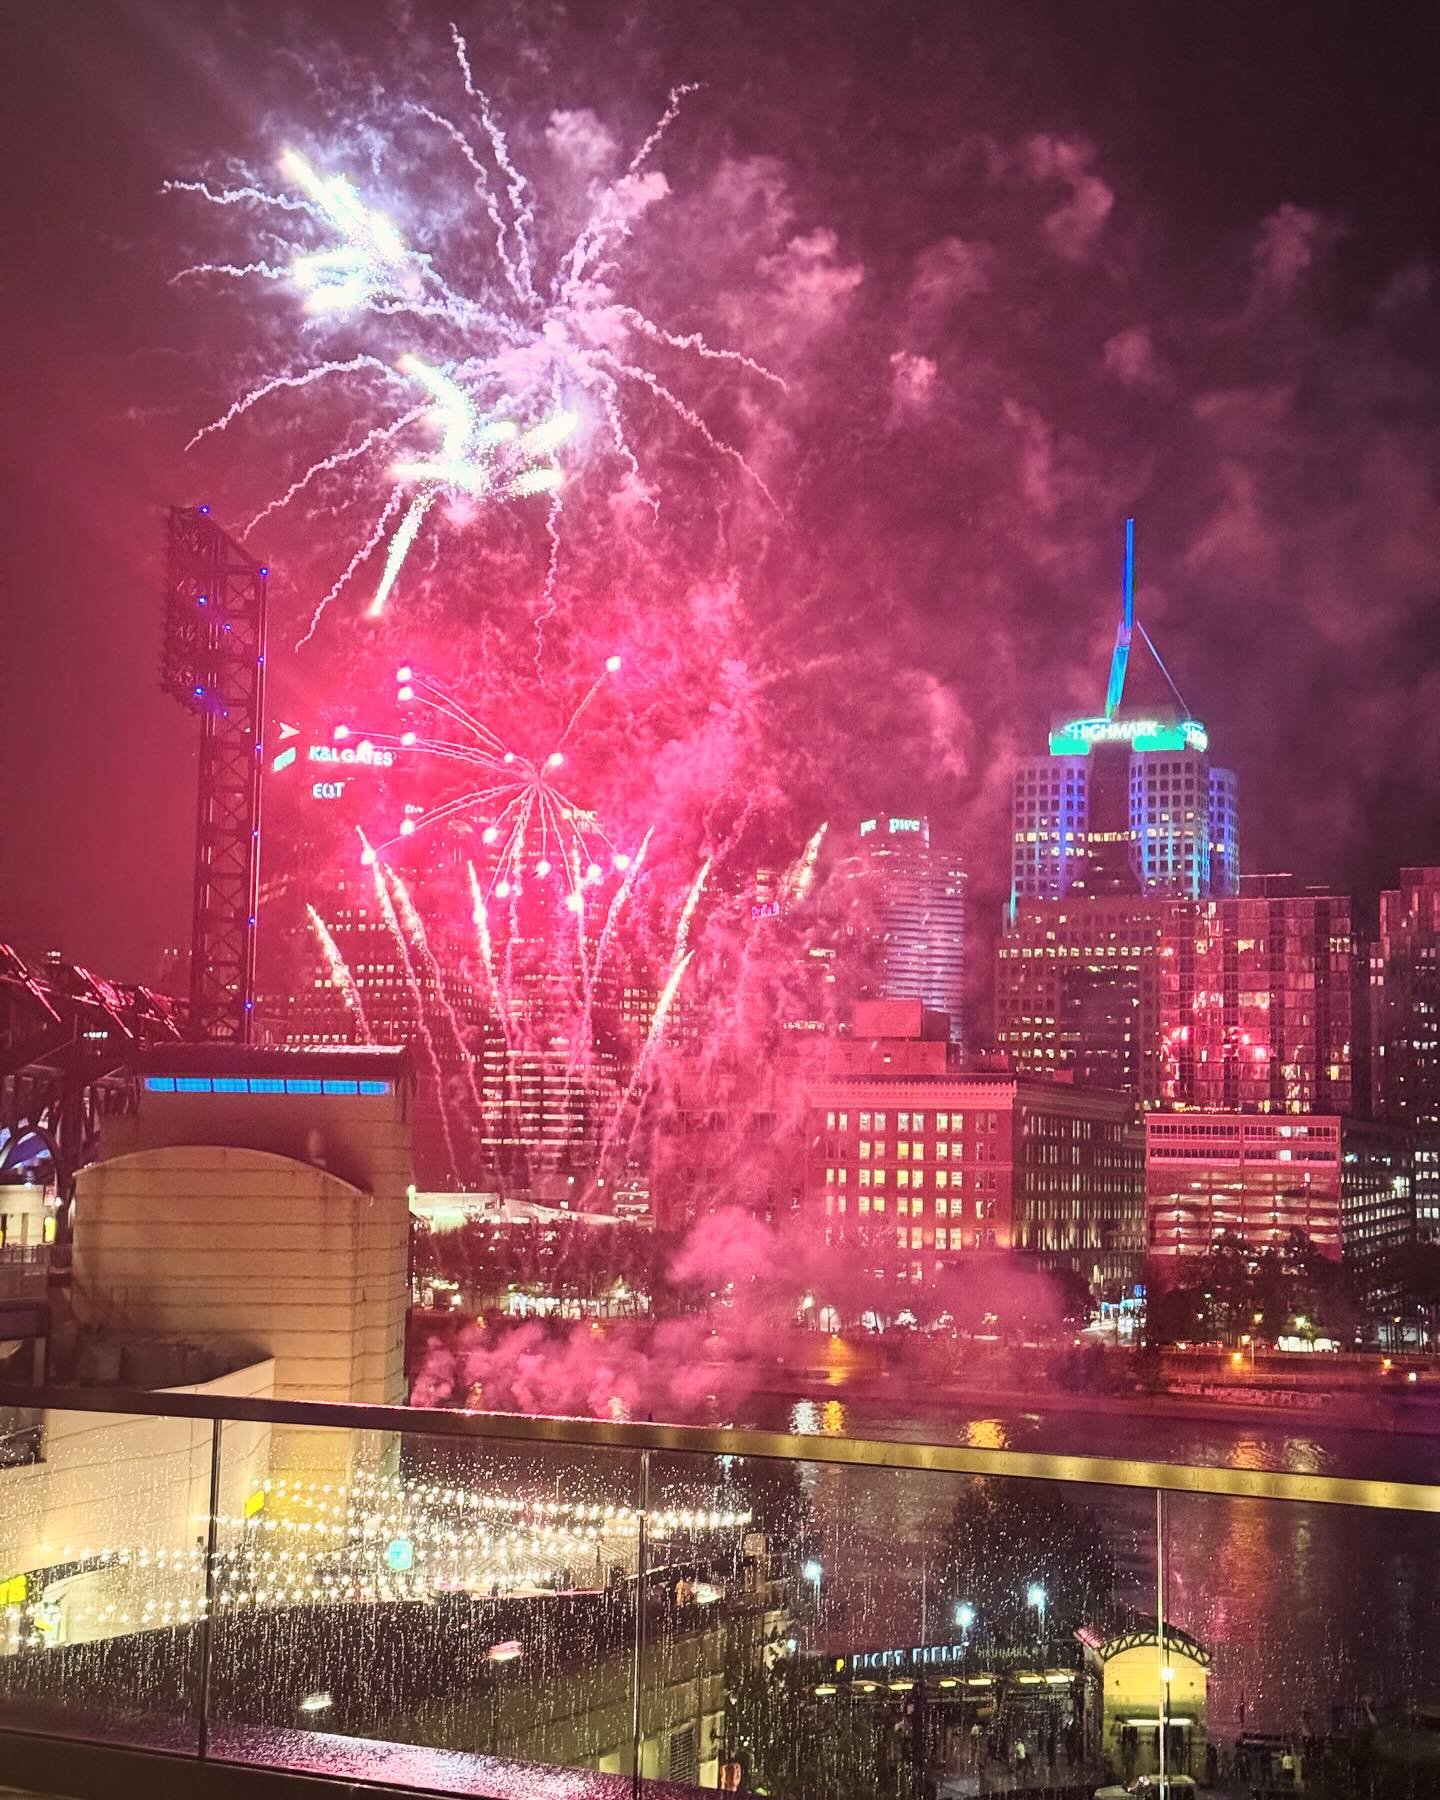 Zambelli Fireworks Night here on our gorgeous rooftop! Can&rsquo;t wait for summer filled with lights! Tour with us today to check it out!! #northshoreflatspgh #crre #pittsburghliving #northshorepgh #pittsburghpirates